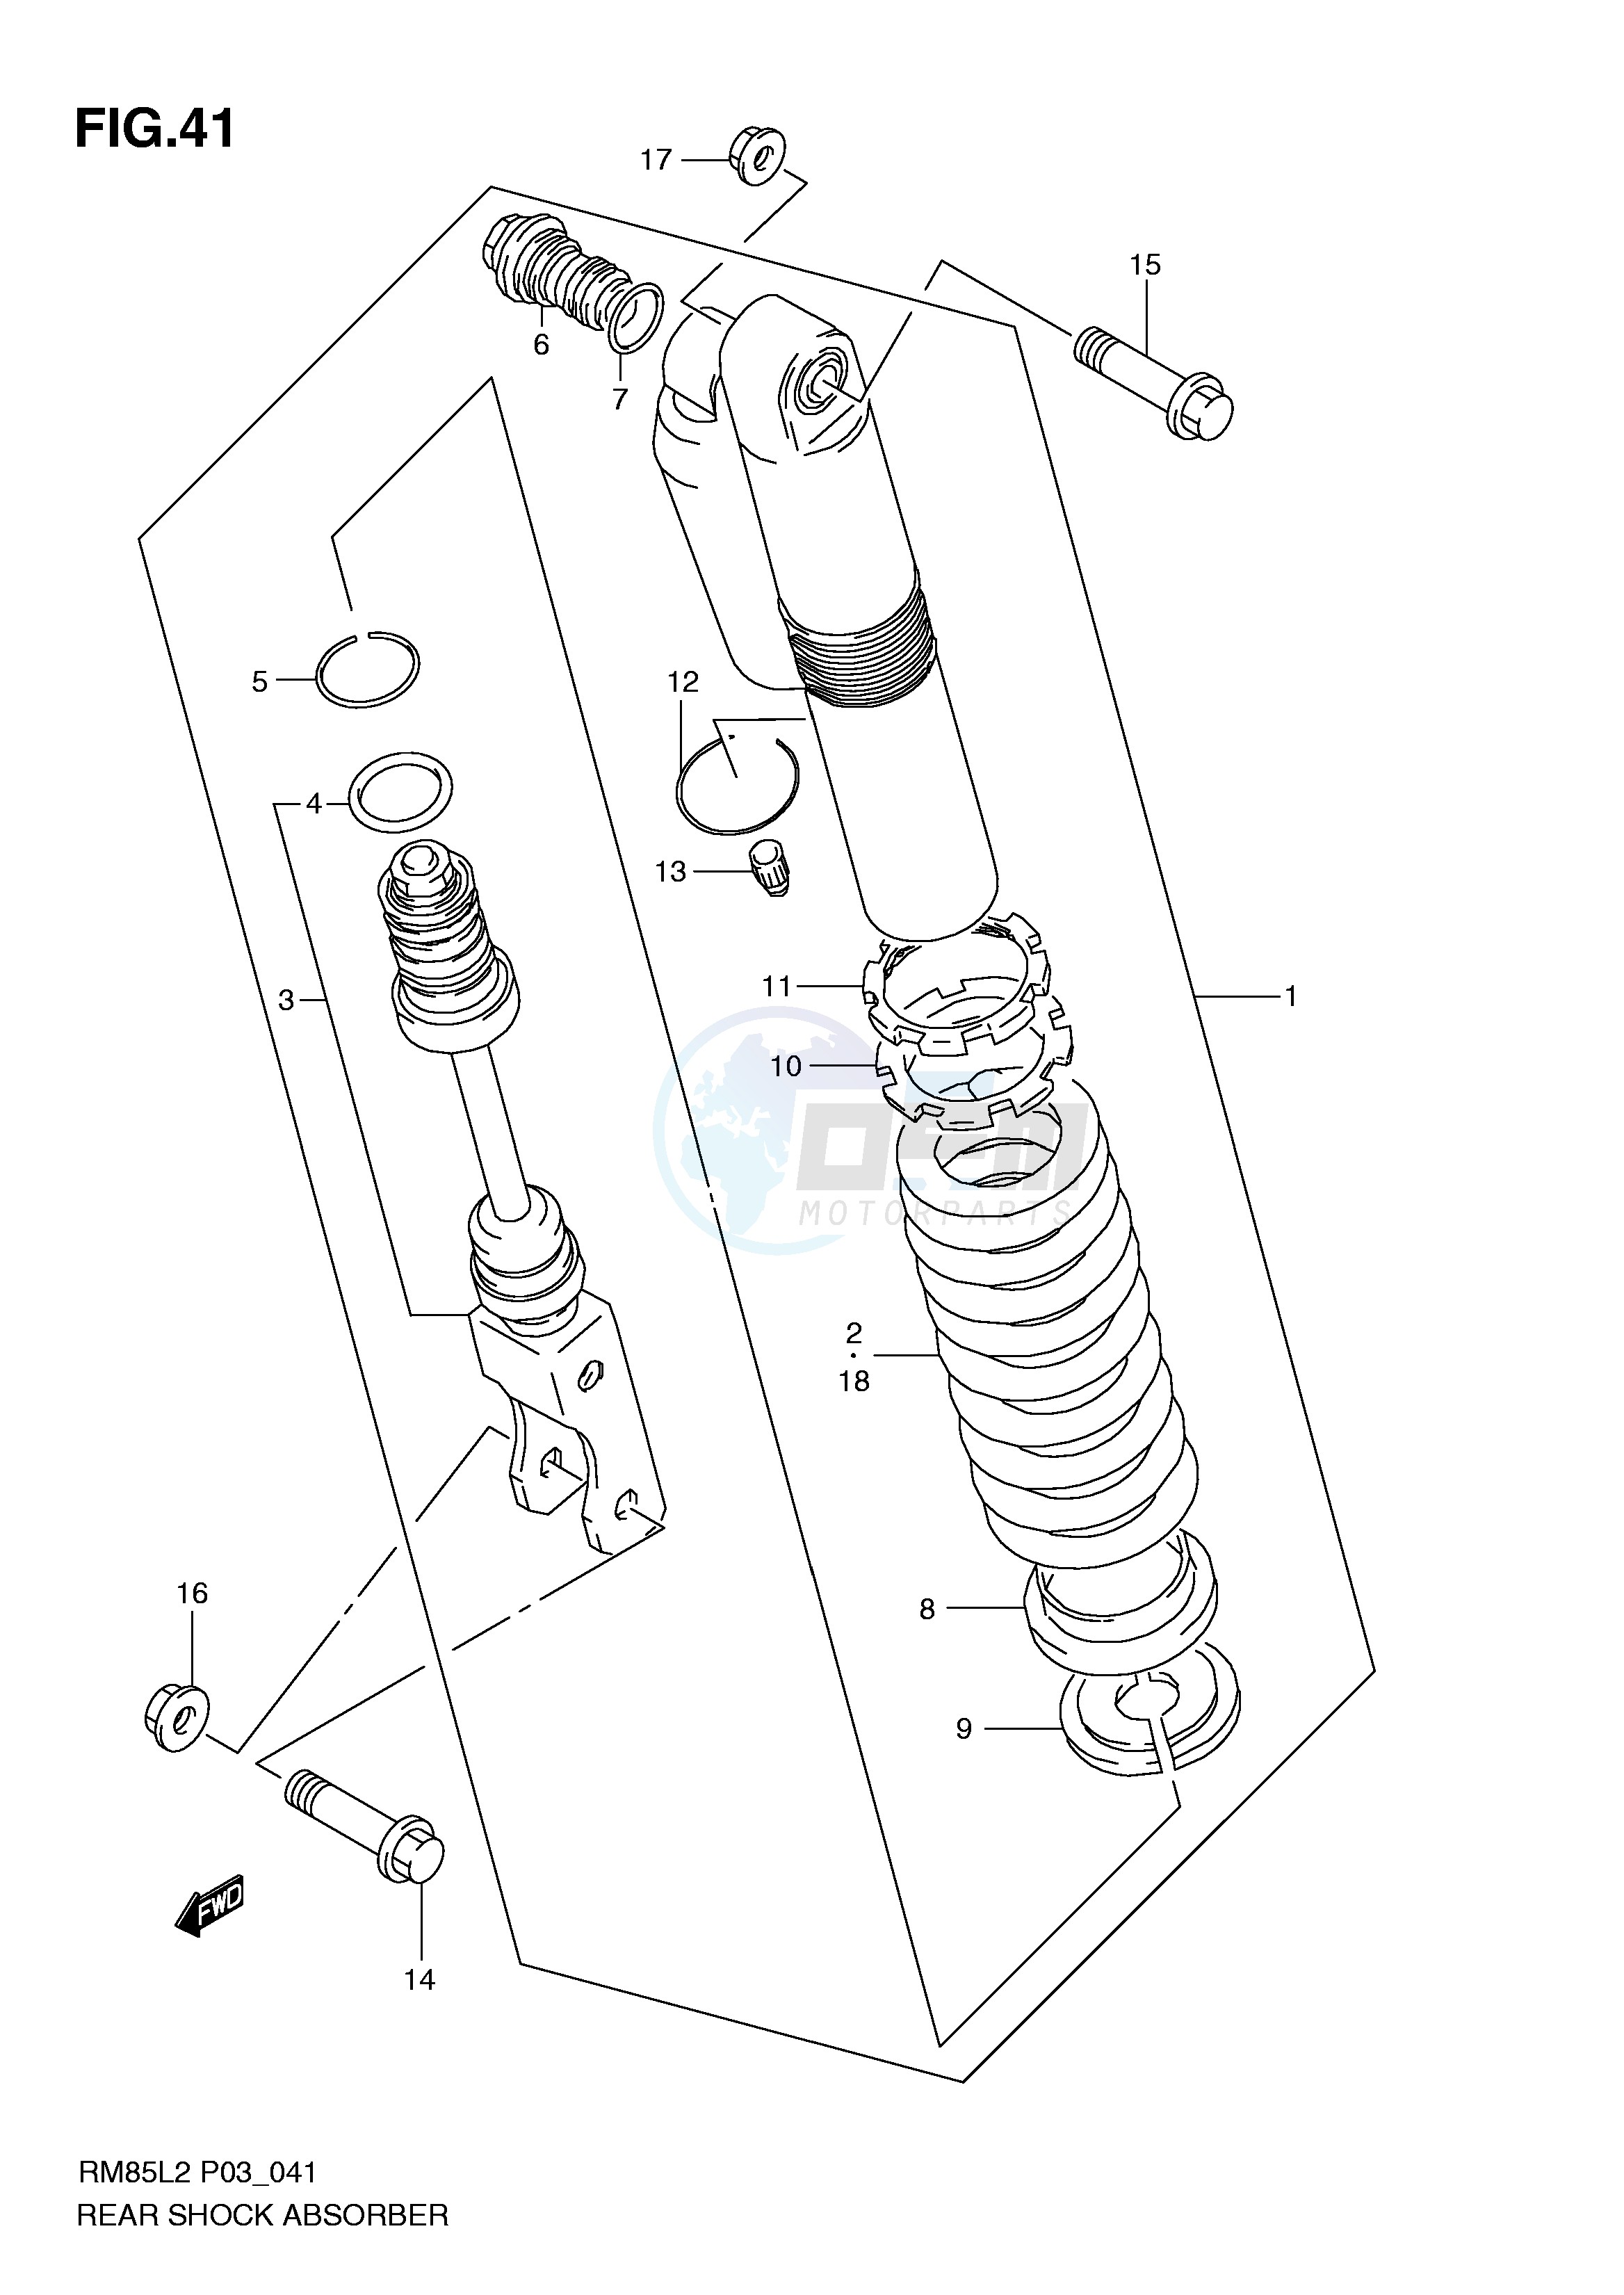 REAR SHOCK ABSORBER (RM85L2 P03) image